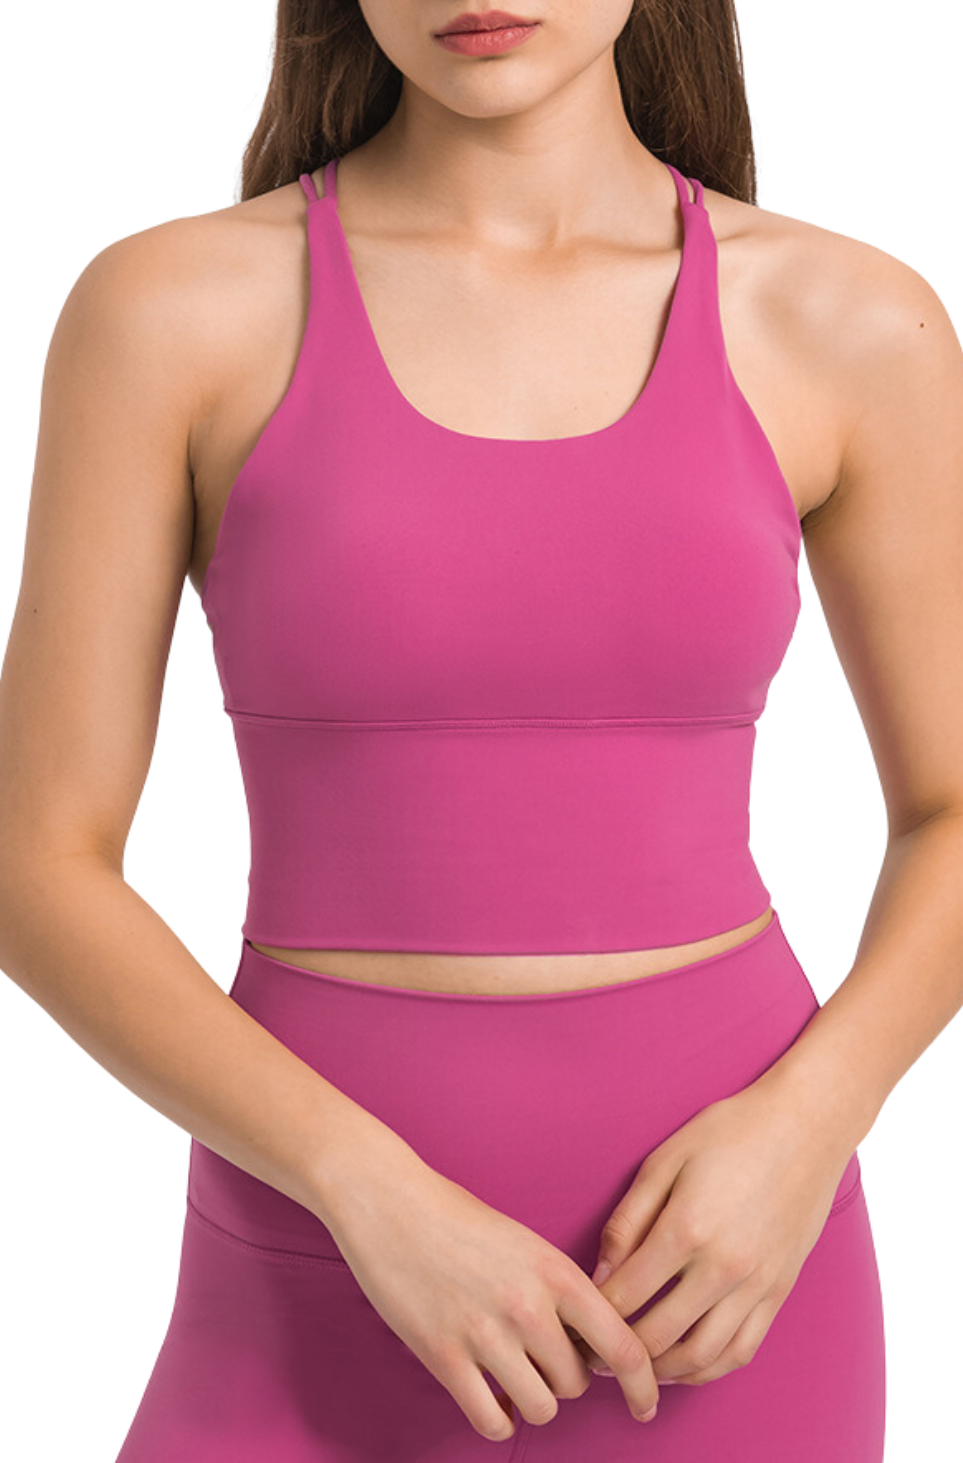 Navalora Fit Open Back High Neck Longline Women's Sports Bra in Lychee Pink with Anchor Logo Detail